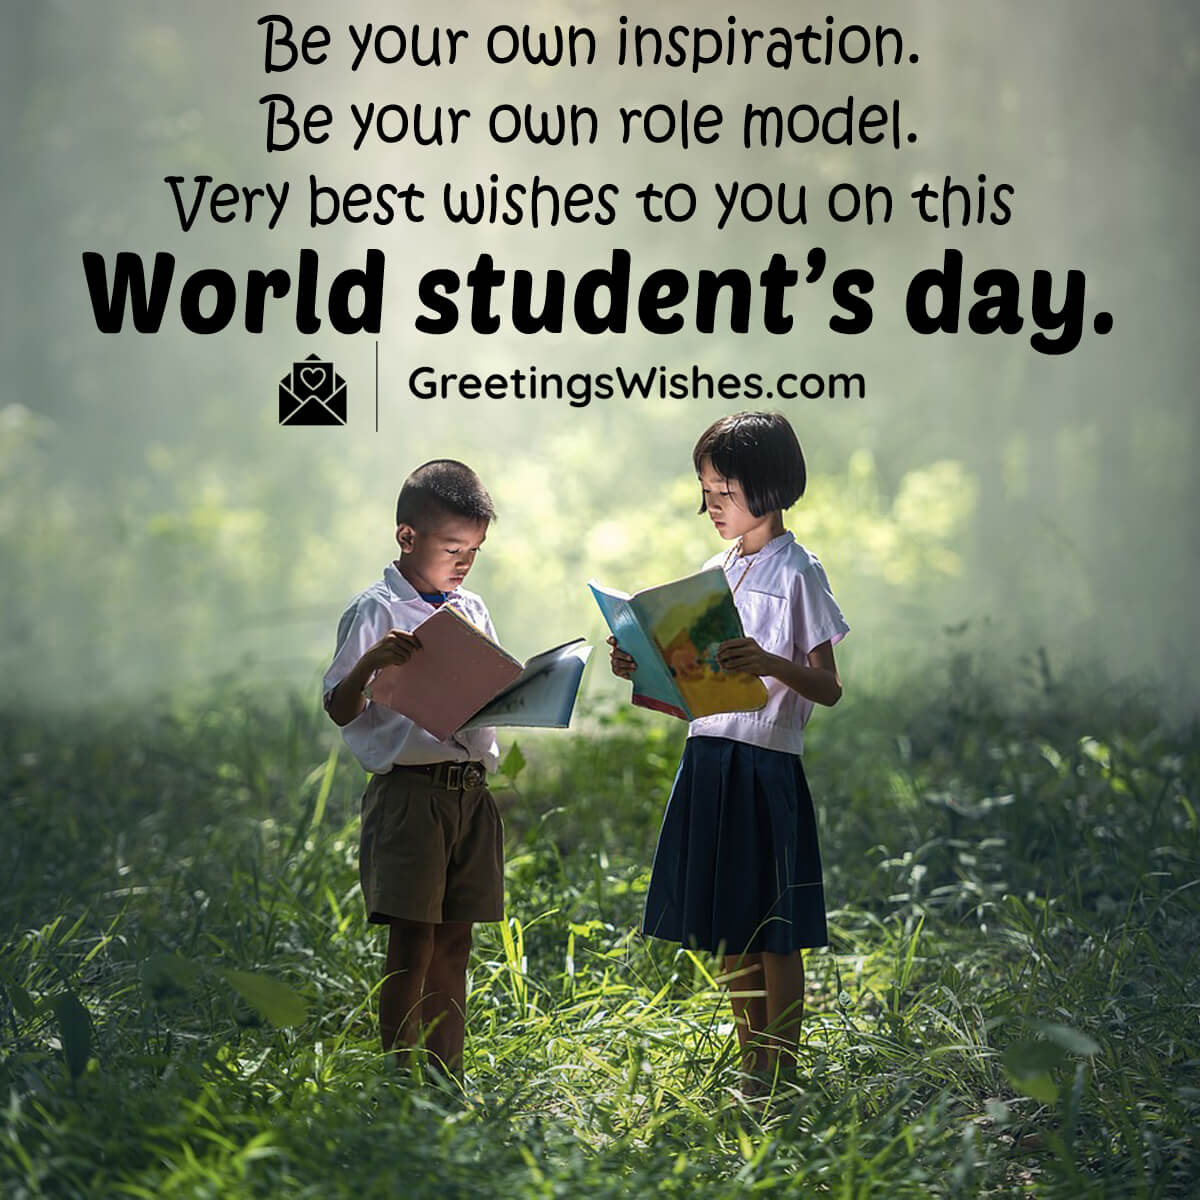 World Student’s Day Images